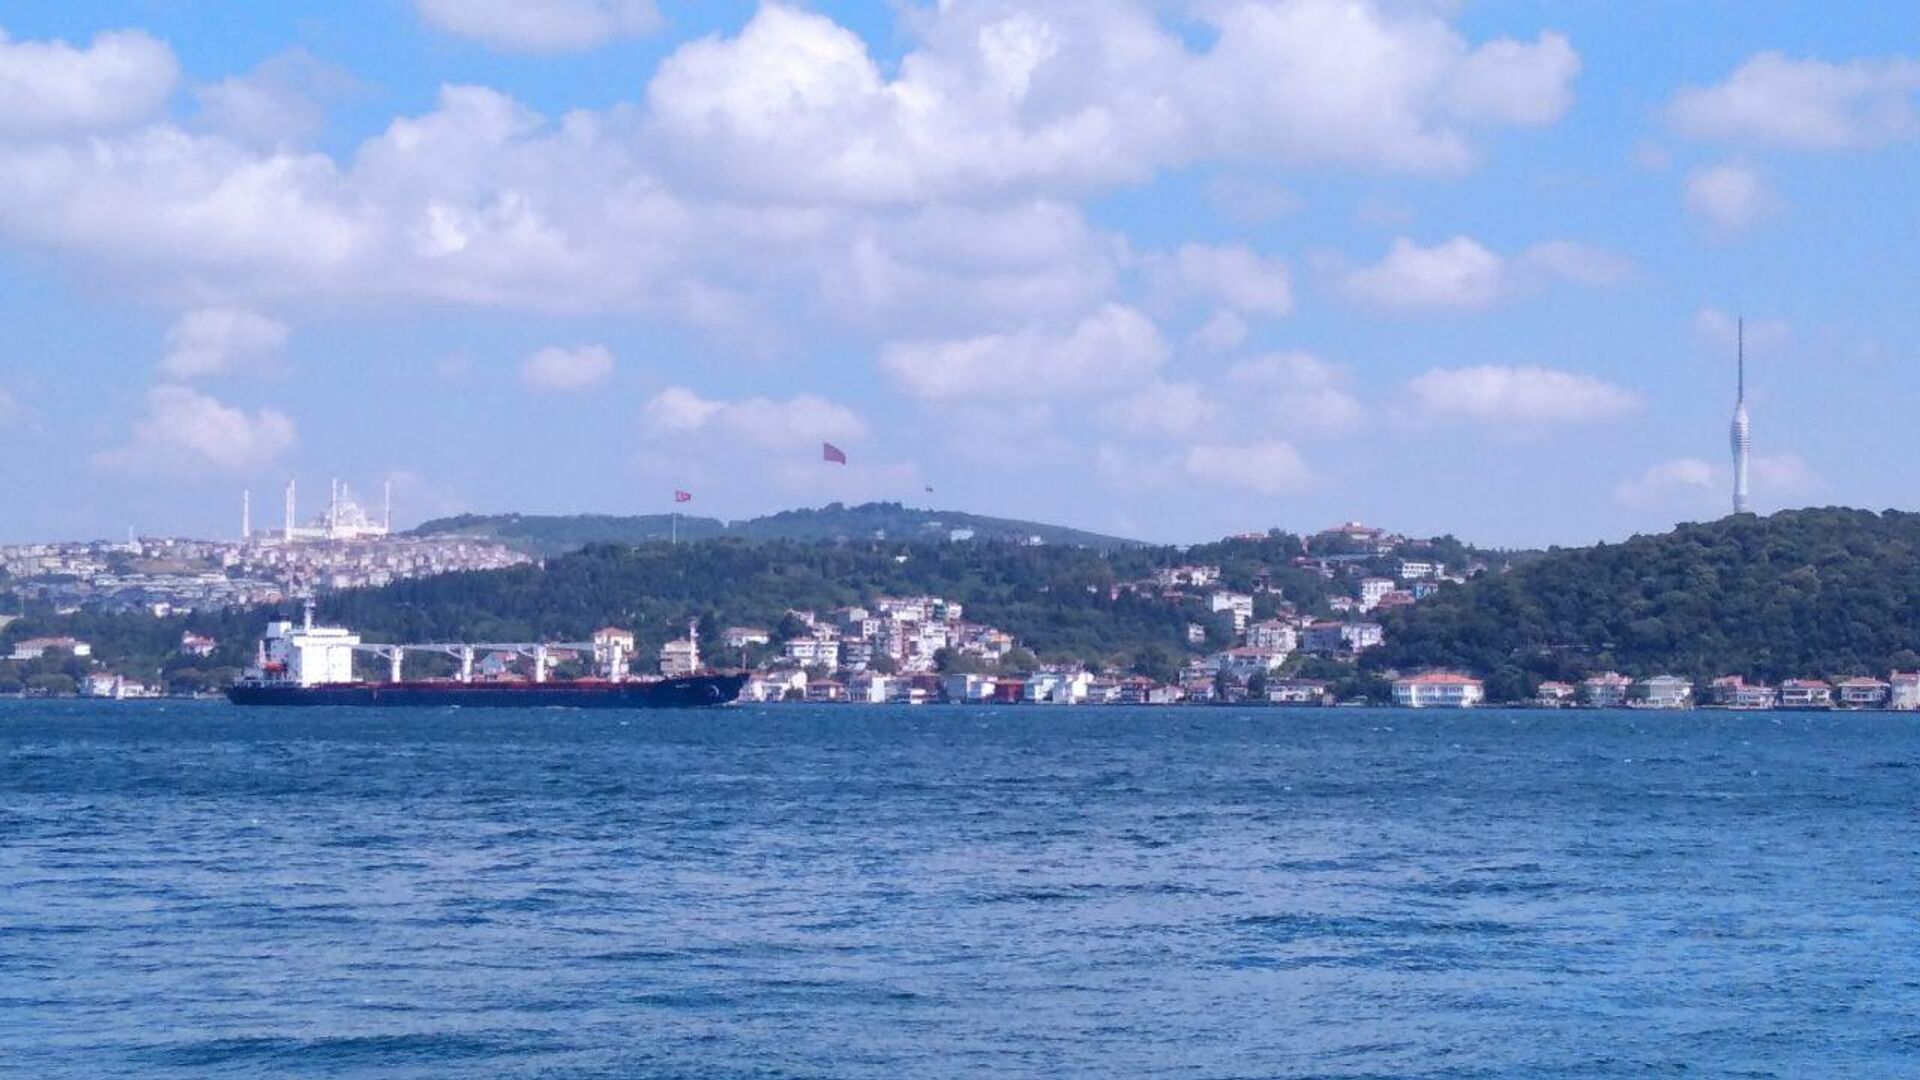 The first commercial vessel that left Ukraine under the Black Sea grain deal was inspected in Istanbul on Wednesday and cleared to proceed to Lebanon, the Joint Coordination Center (JCC) said - Sputnik International, 1920, 04.08.2022